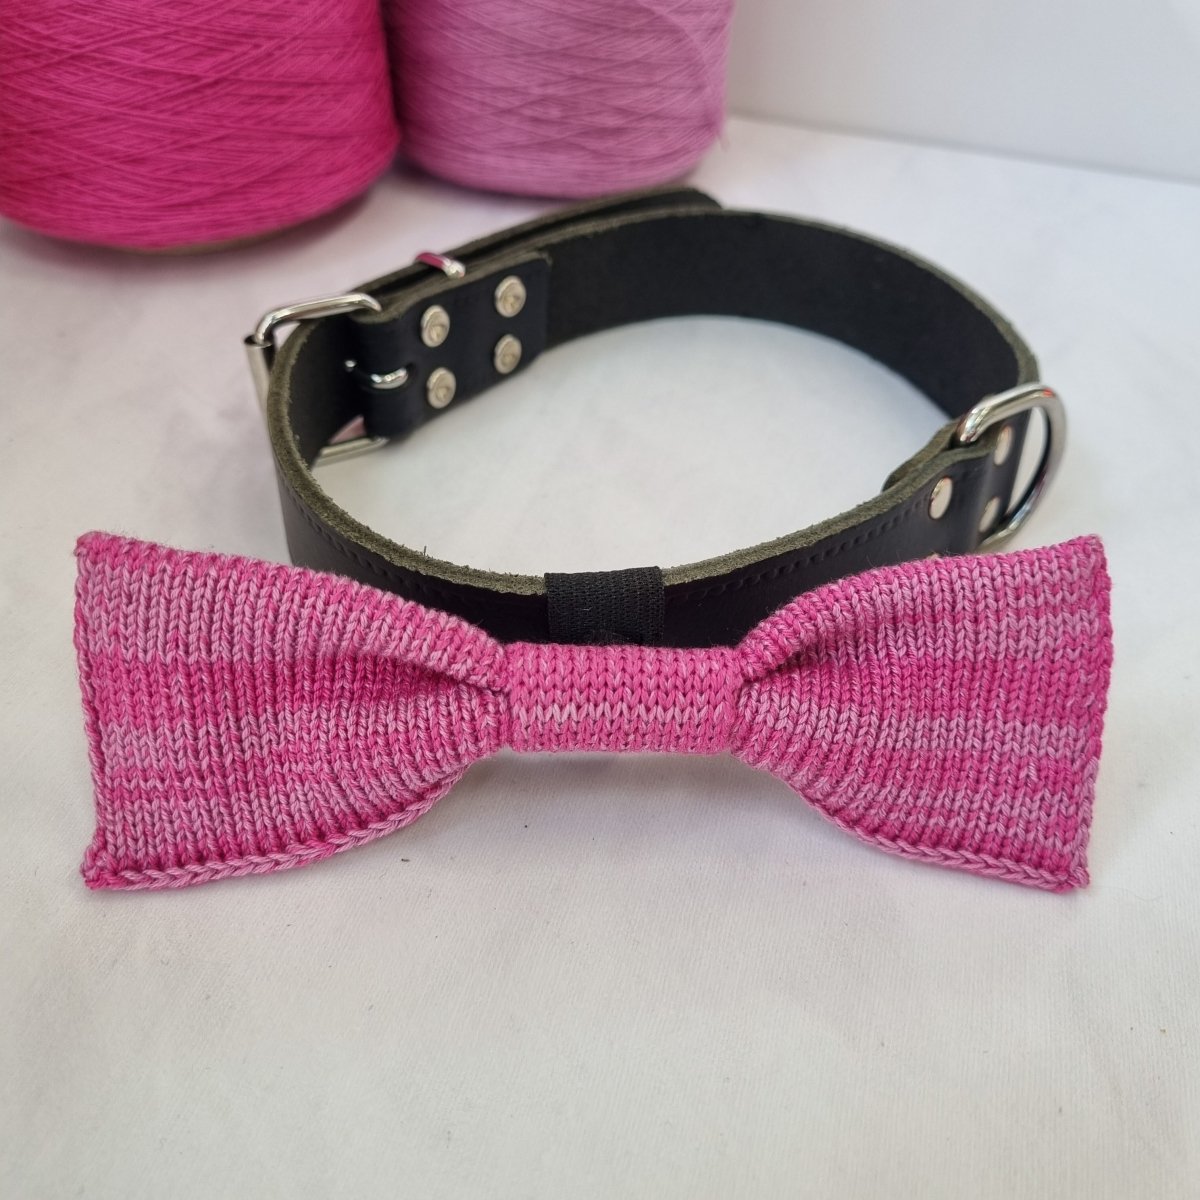 Large Dog Bow Tie: Raspberry Mix - Wool & Water